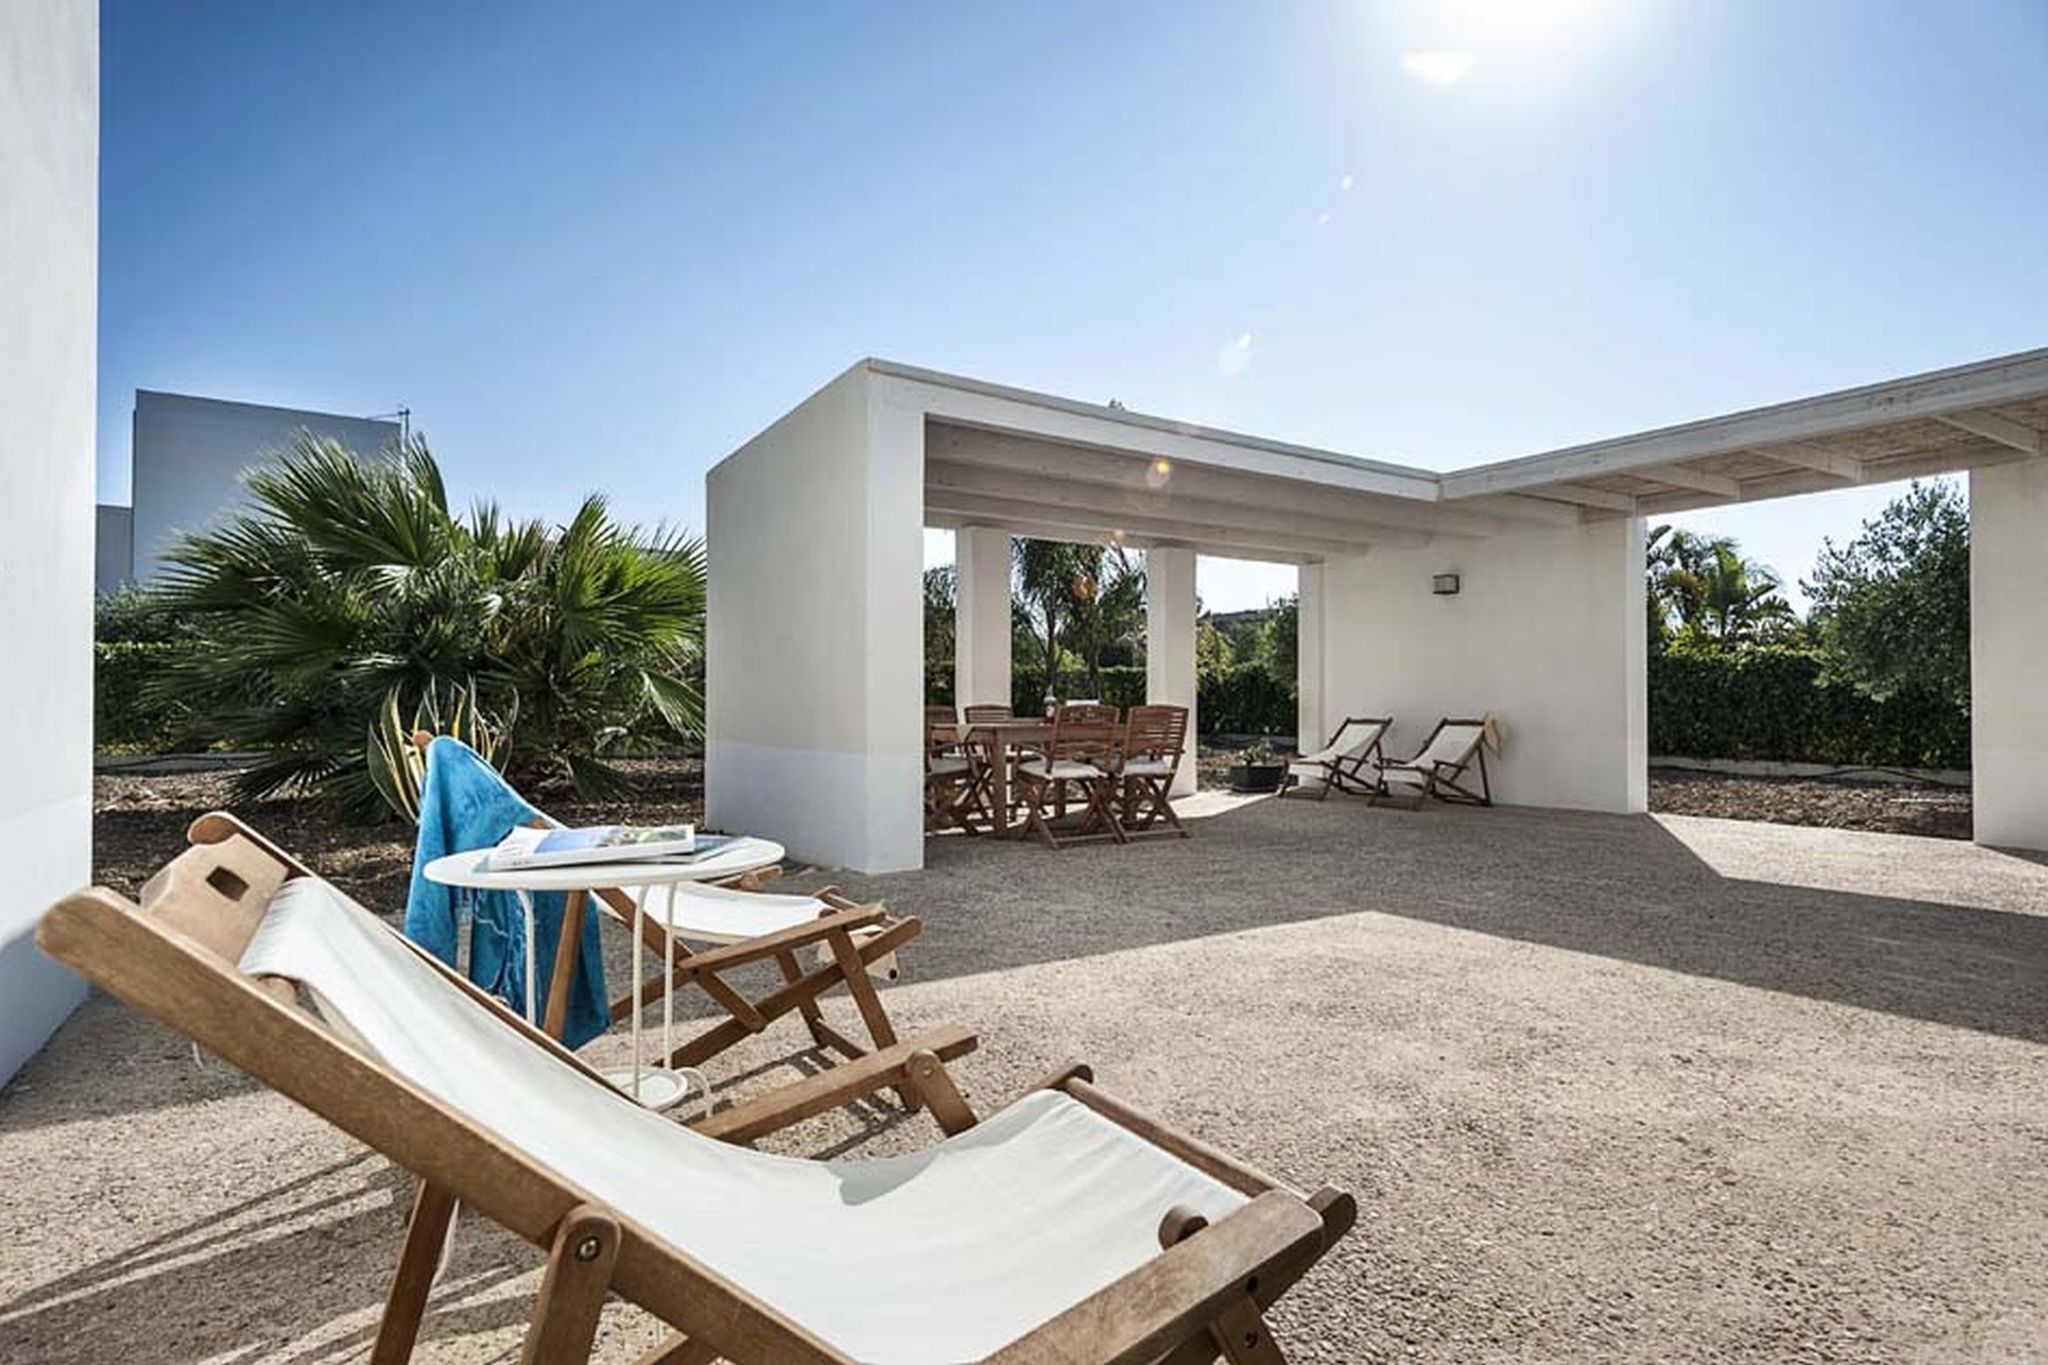 New villa at 300m from the sea with very big garden and a barbecue